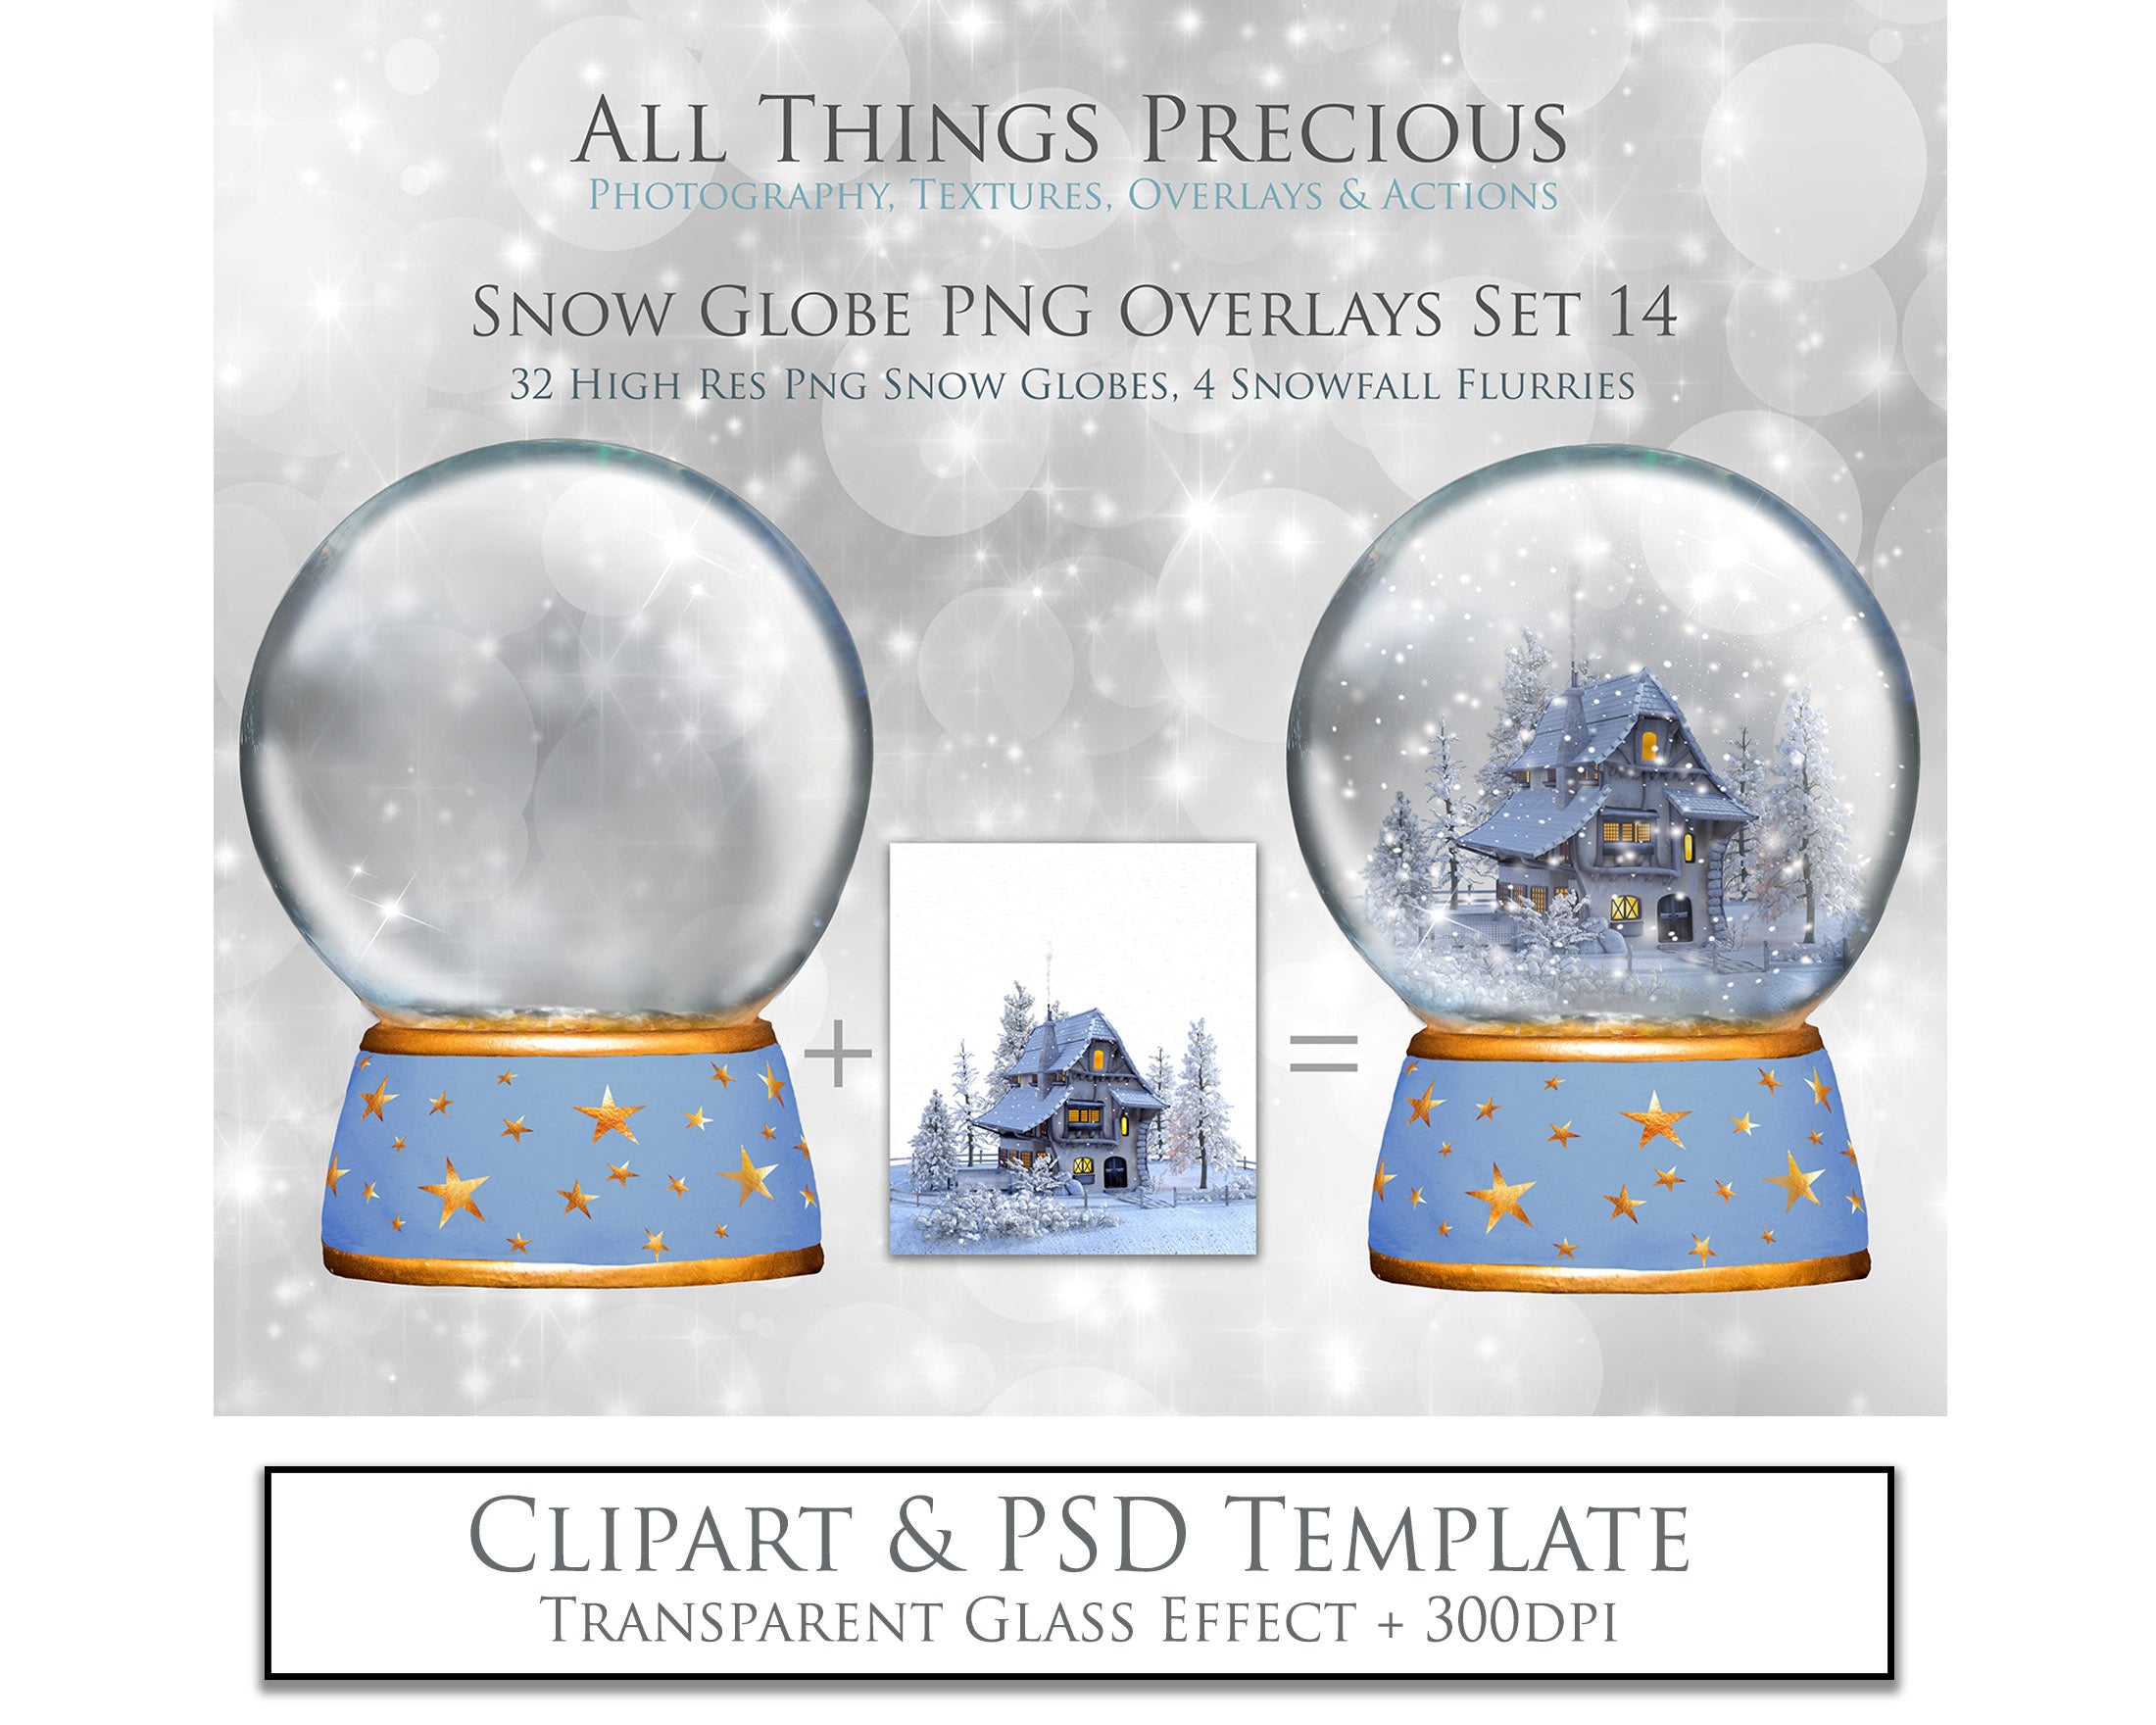 Digital Snow Globe Clipart and Background with snow Overlays and a PSD Template included in the set.The globe is transparent, perfect for you to add your own images and retain the snow globe effect. Photoshop Photography Background. Printable, Editable for Christmas with Santa Window or Glass Globe. ATP Textures